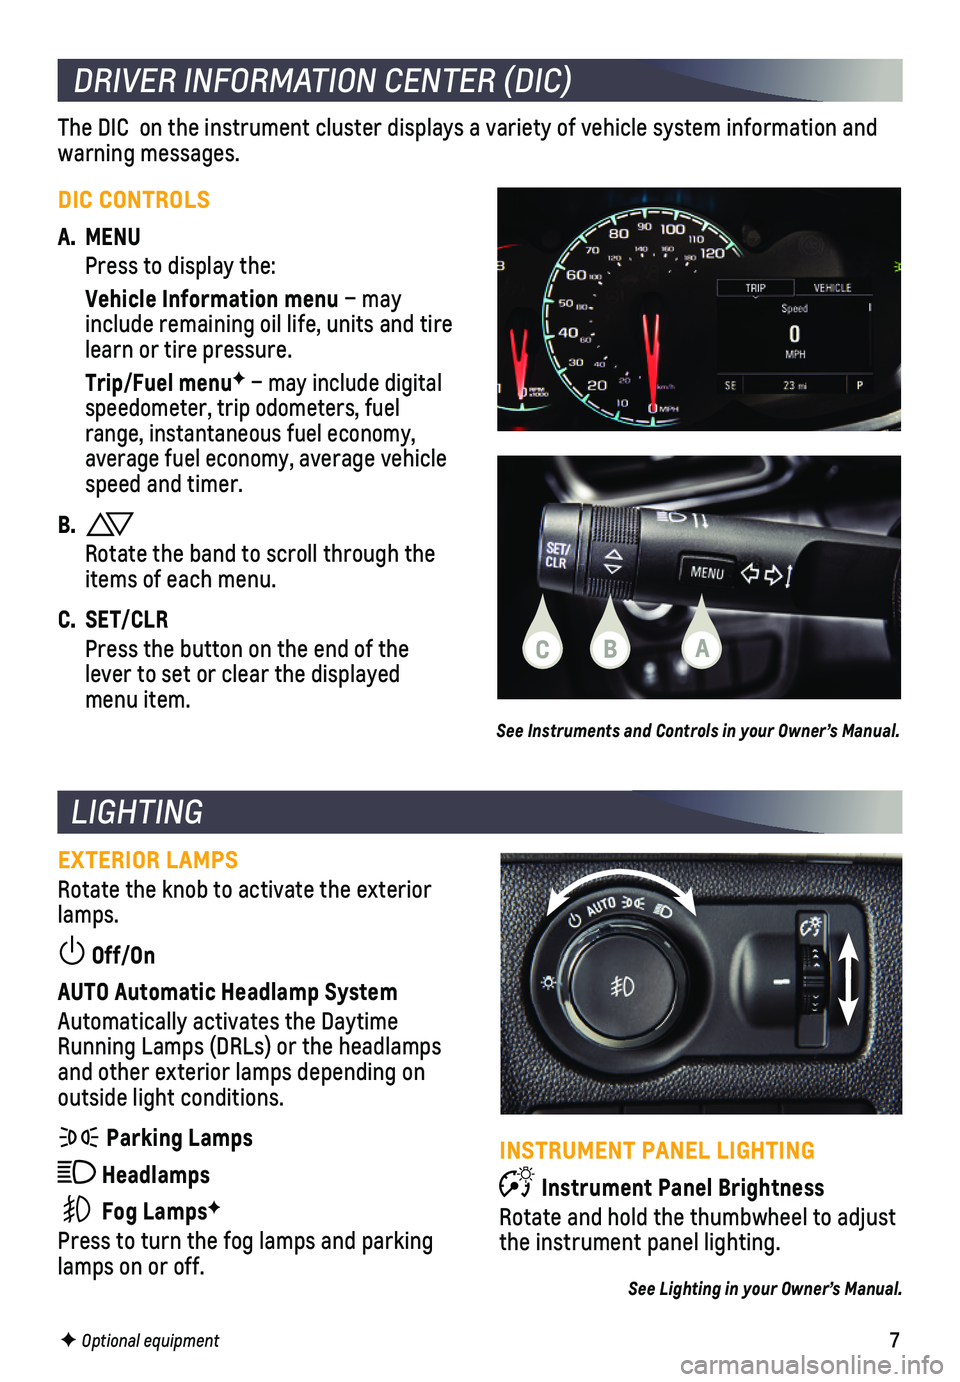 CHEVROLET SPARK 2020  Get To Know Guide 7
LIGHTING
EXTERIOR LAMPS
Rotate the knob to activate the exterior lamps.
 Off/On 
AUTO Automatic Headlamp System
Automatically activates the Daytime Running Lamps (DRLs) or the headlamps and other ex